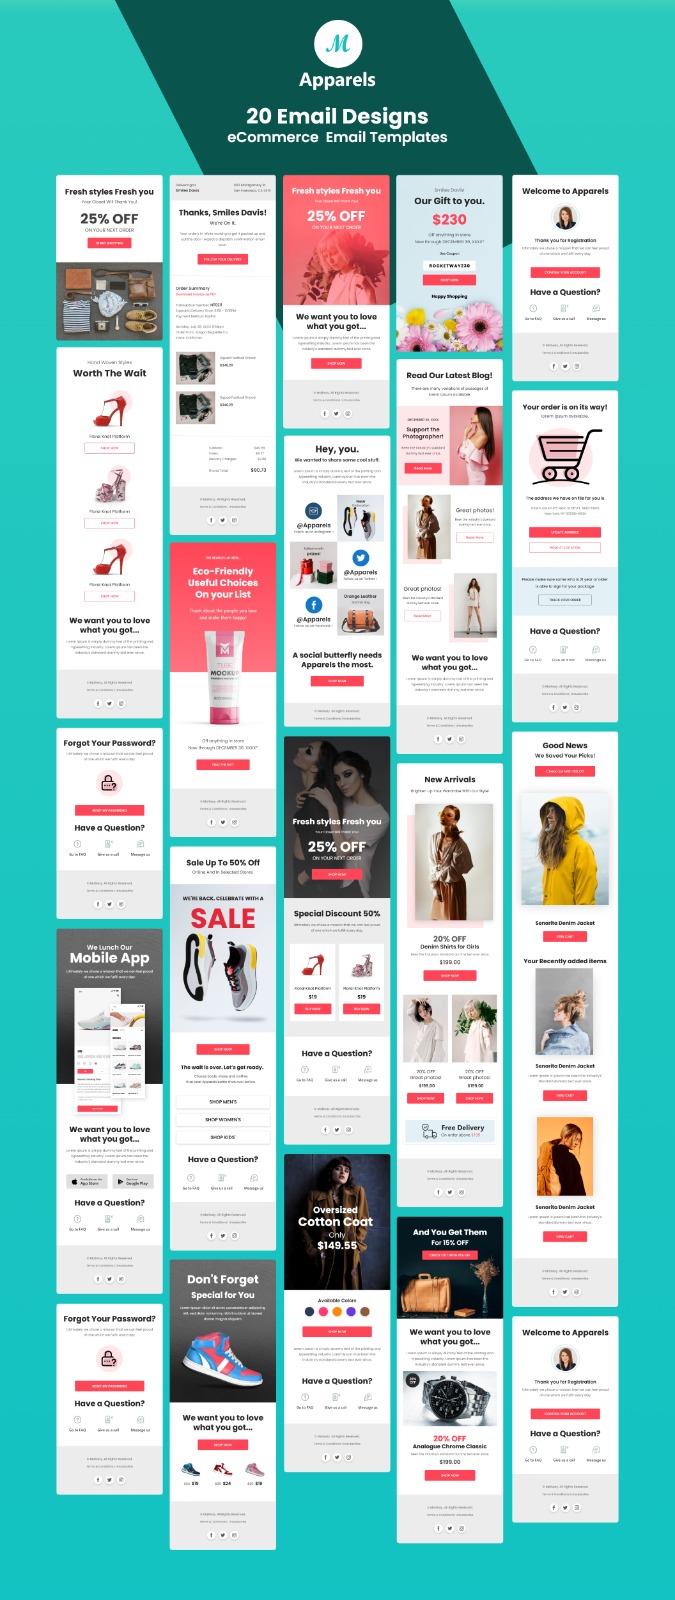 M Apparels Ecommerce Eamil Templates - 1